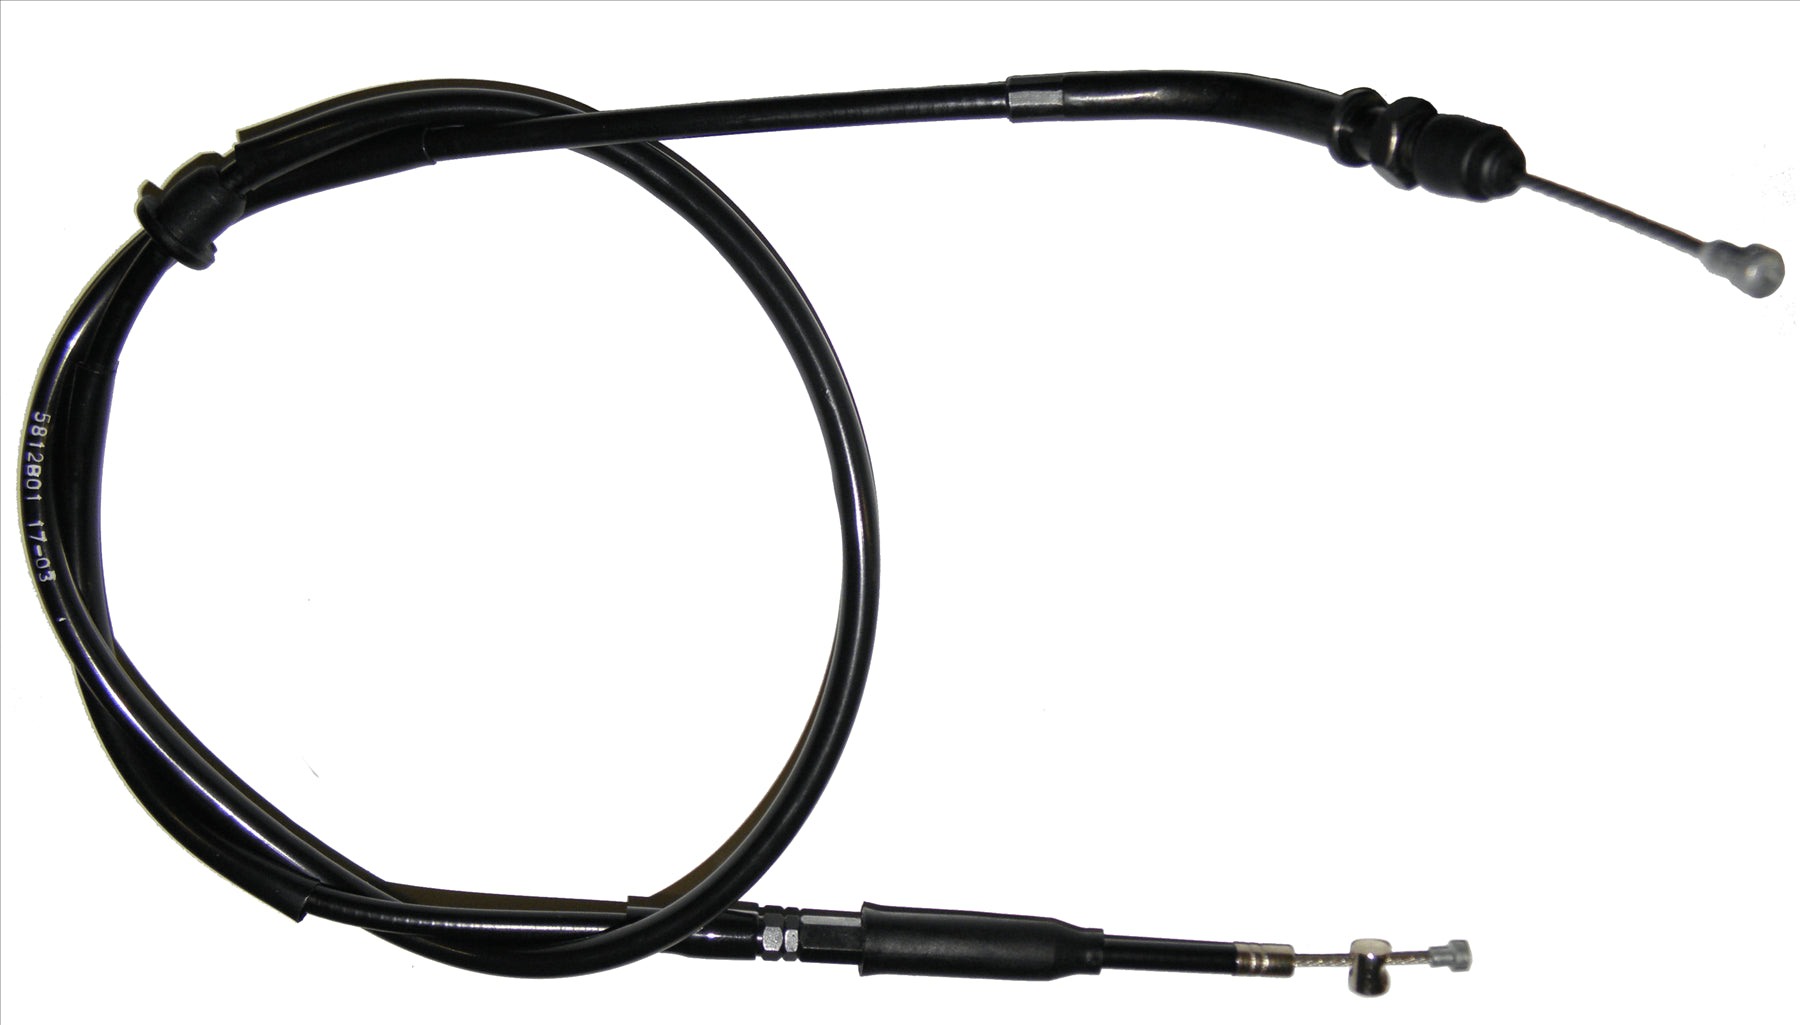 Apico Black Clutch Cable For Honda CRF 450RX 2017-2019